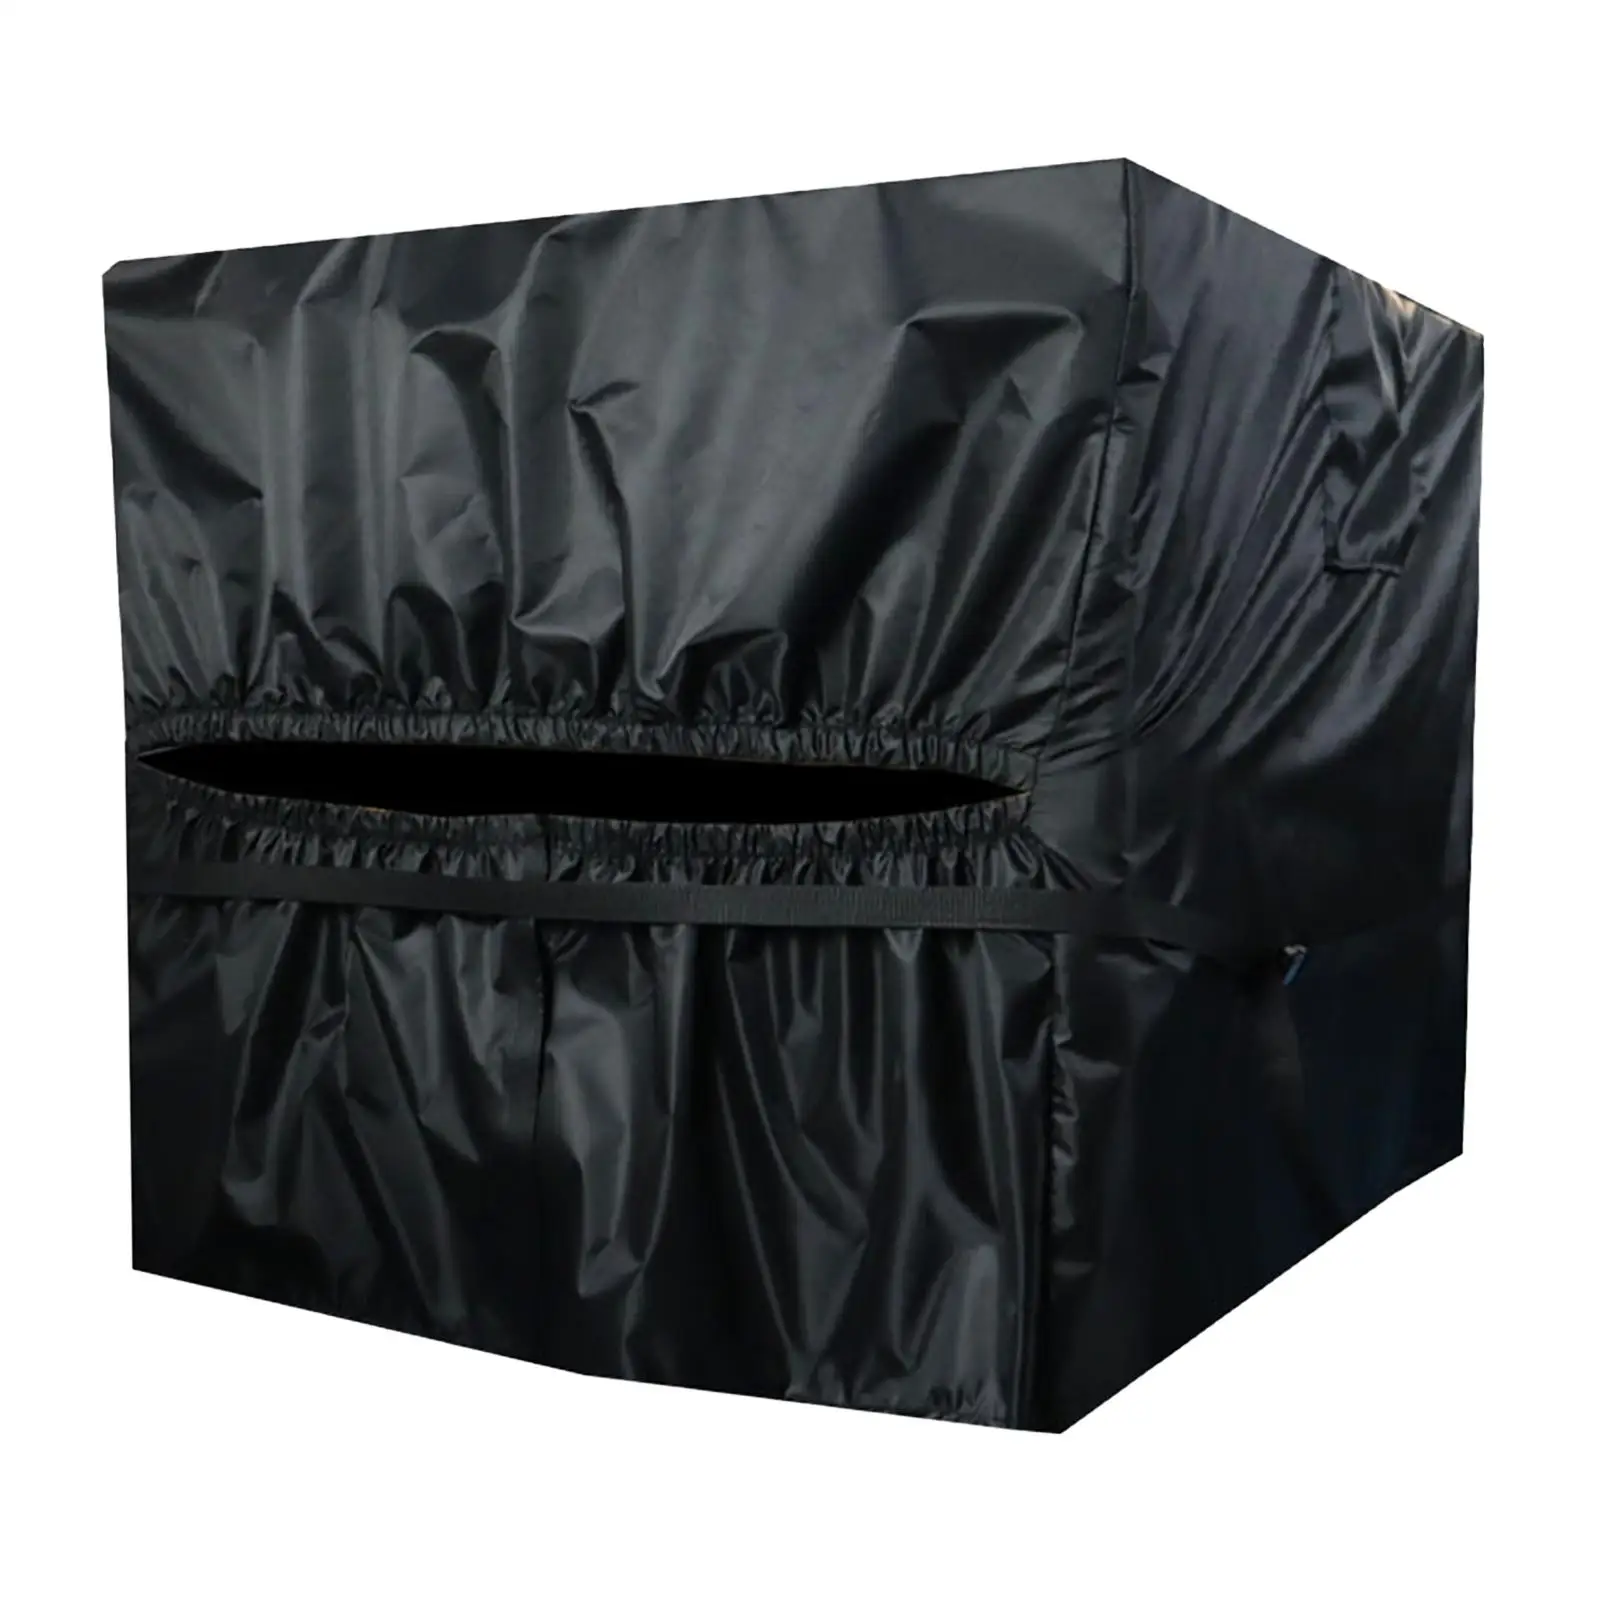 Pool Heater Cover Durable Furniture Covers Square Secure Fit Oxford Black Multifunction Dustproof for Outside Units for Outdoor